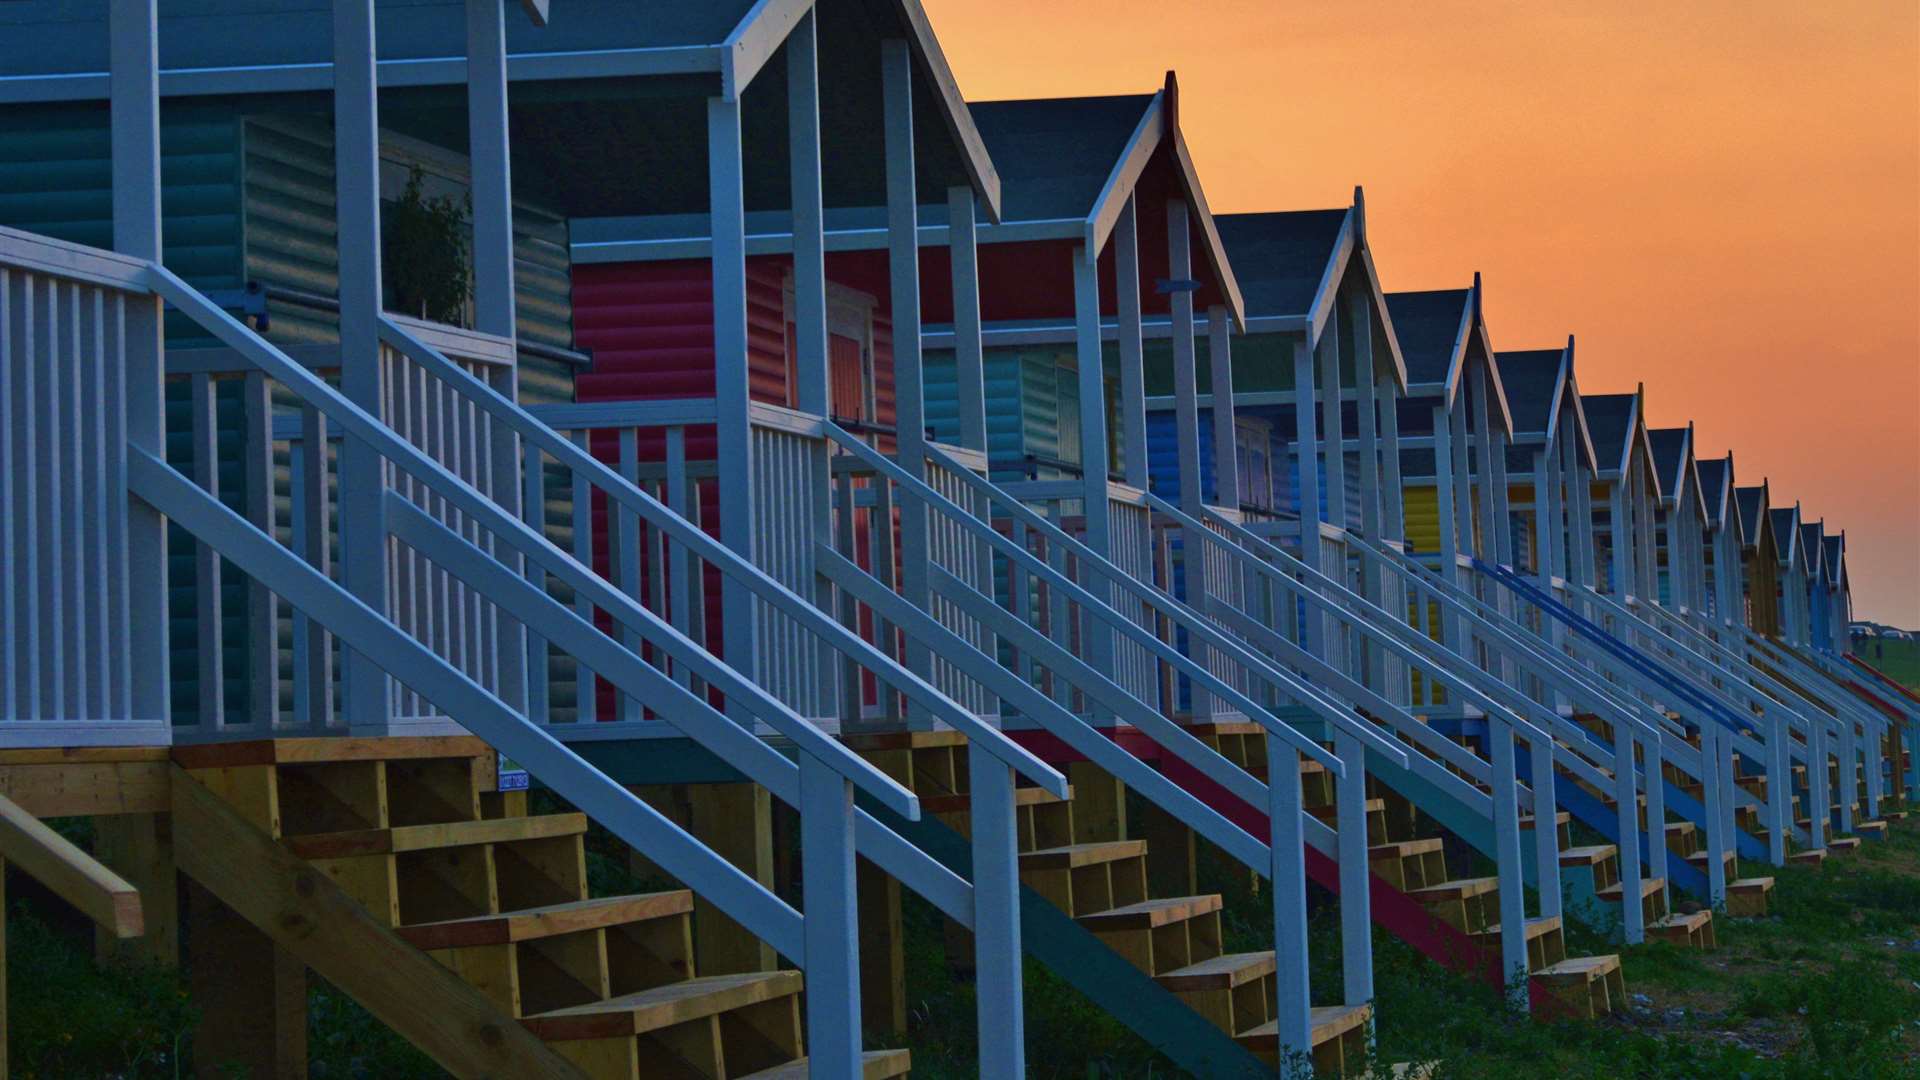 Beach huts on The Leas, Minster. Picture by Darren Birchall